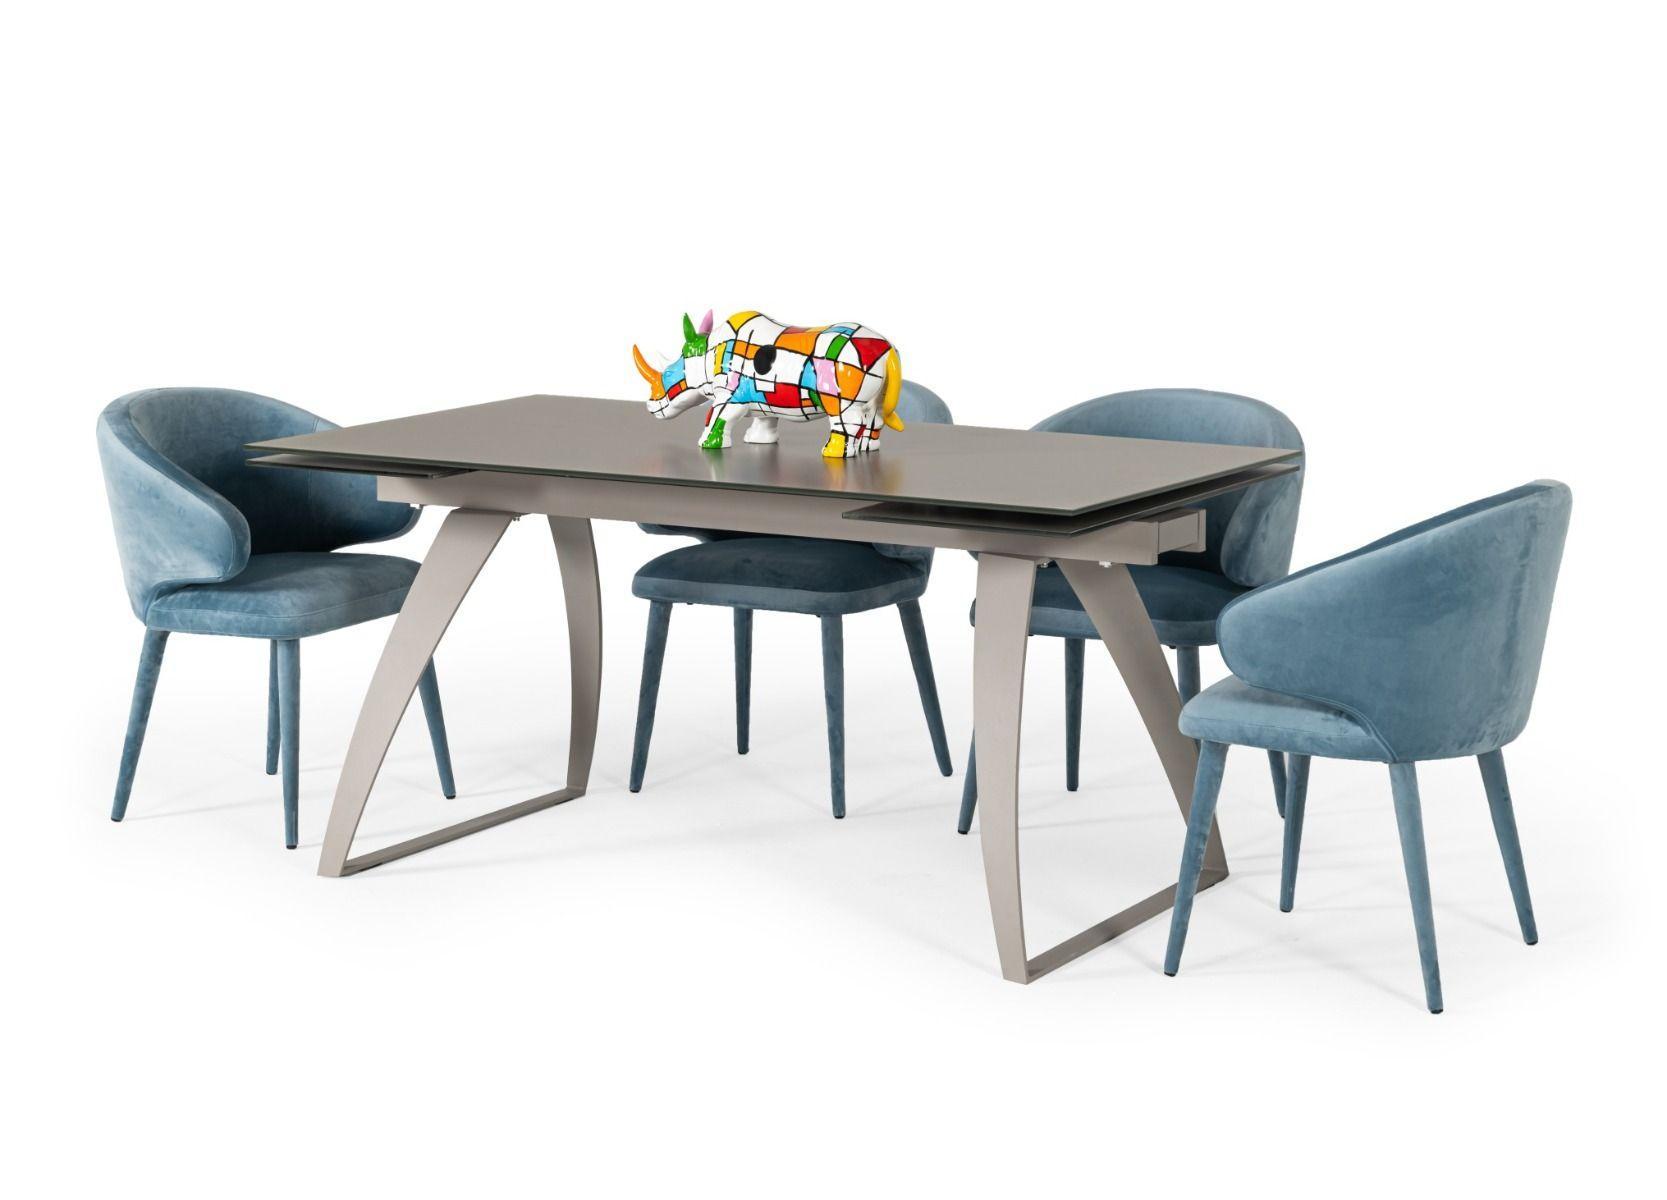 Contemporary, Modern Dining Room Set Pittson Salem VGYFDT8852F-GRY-DT-9pcs in Gray Fabric